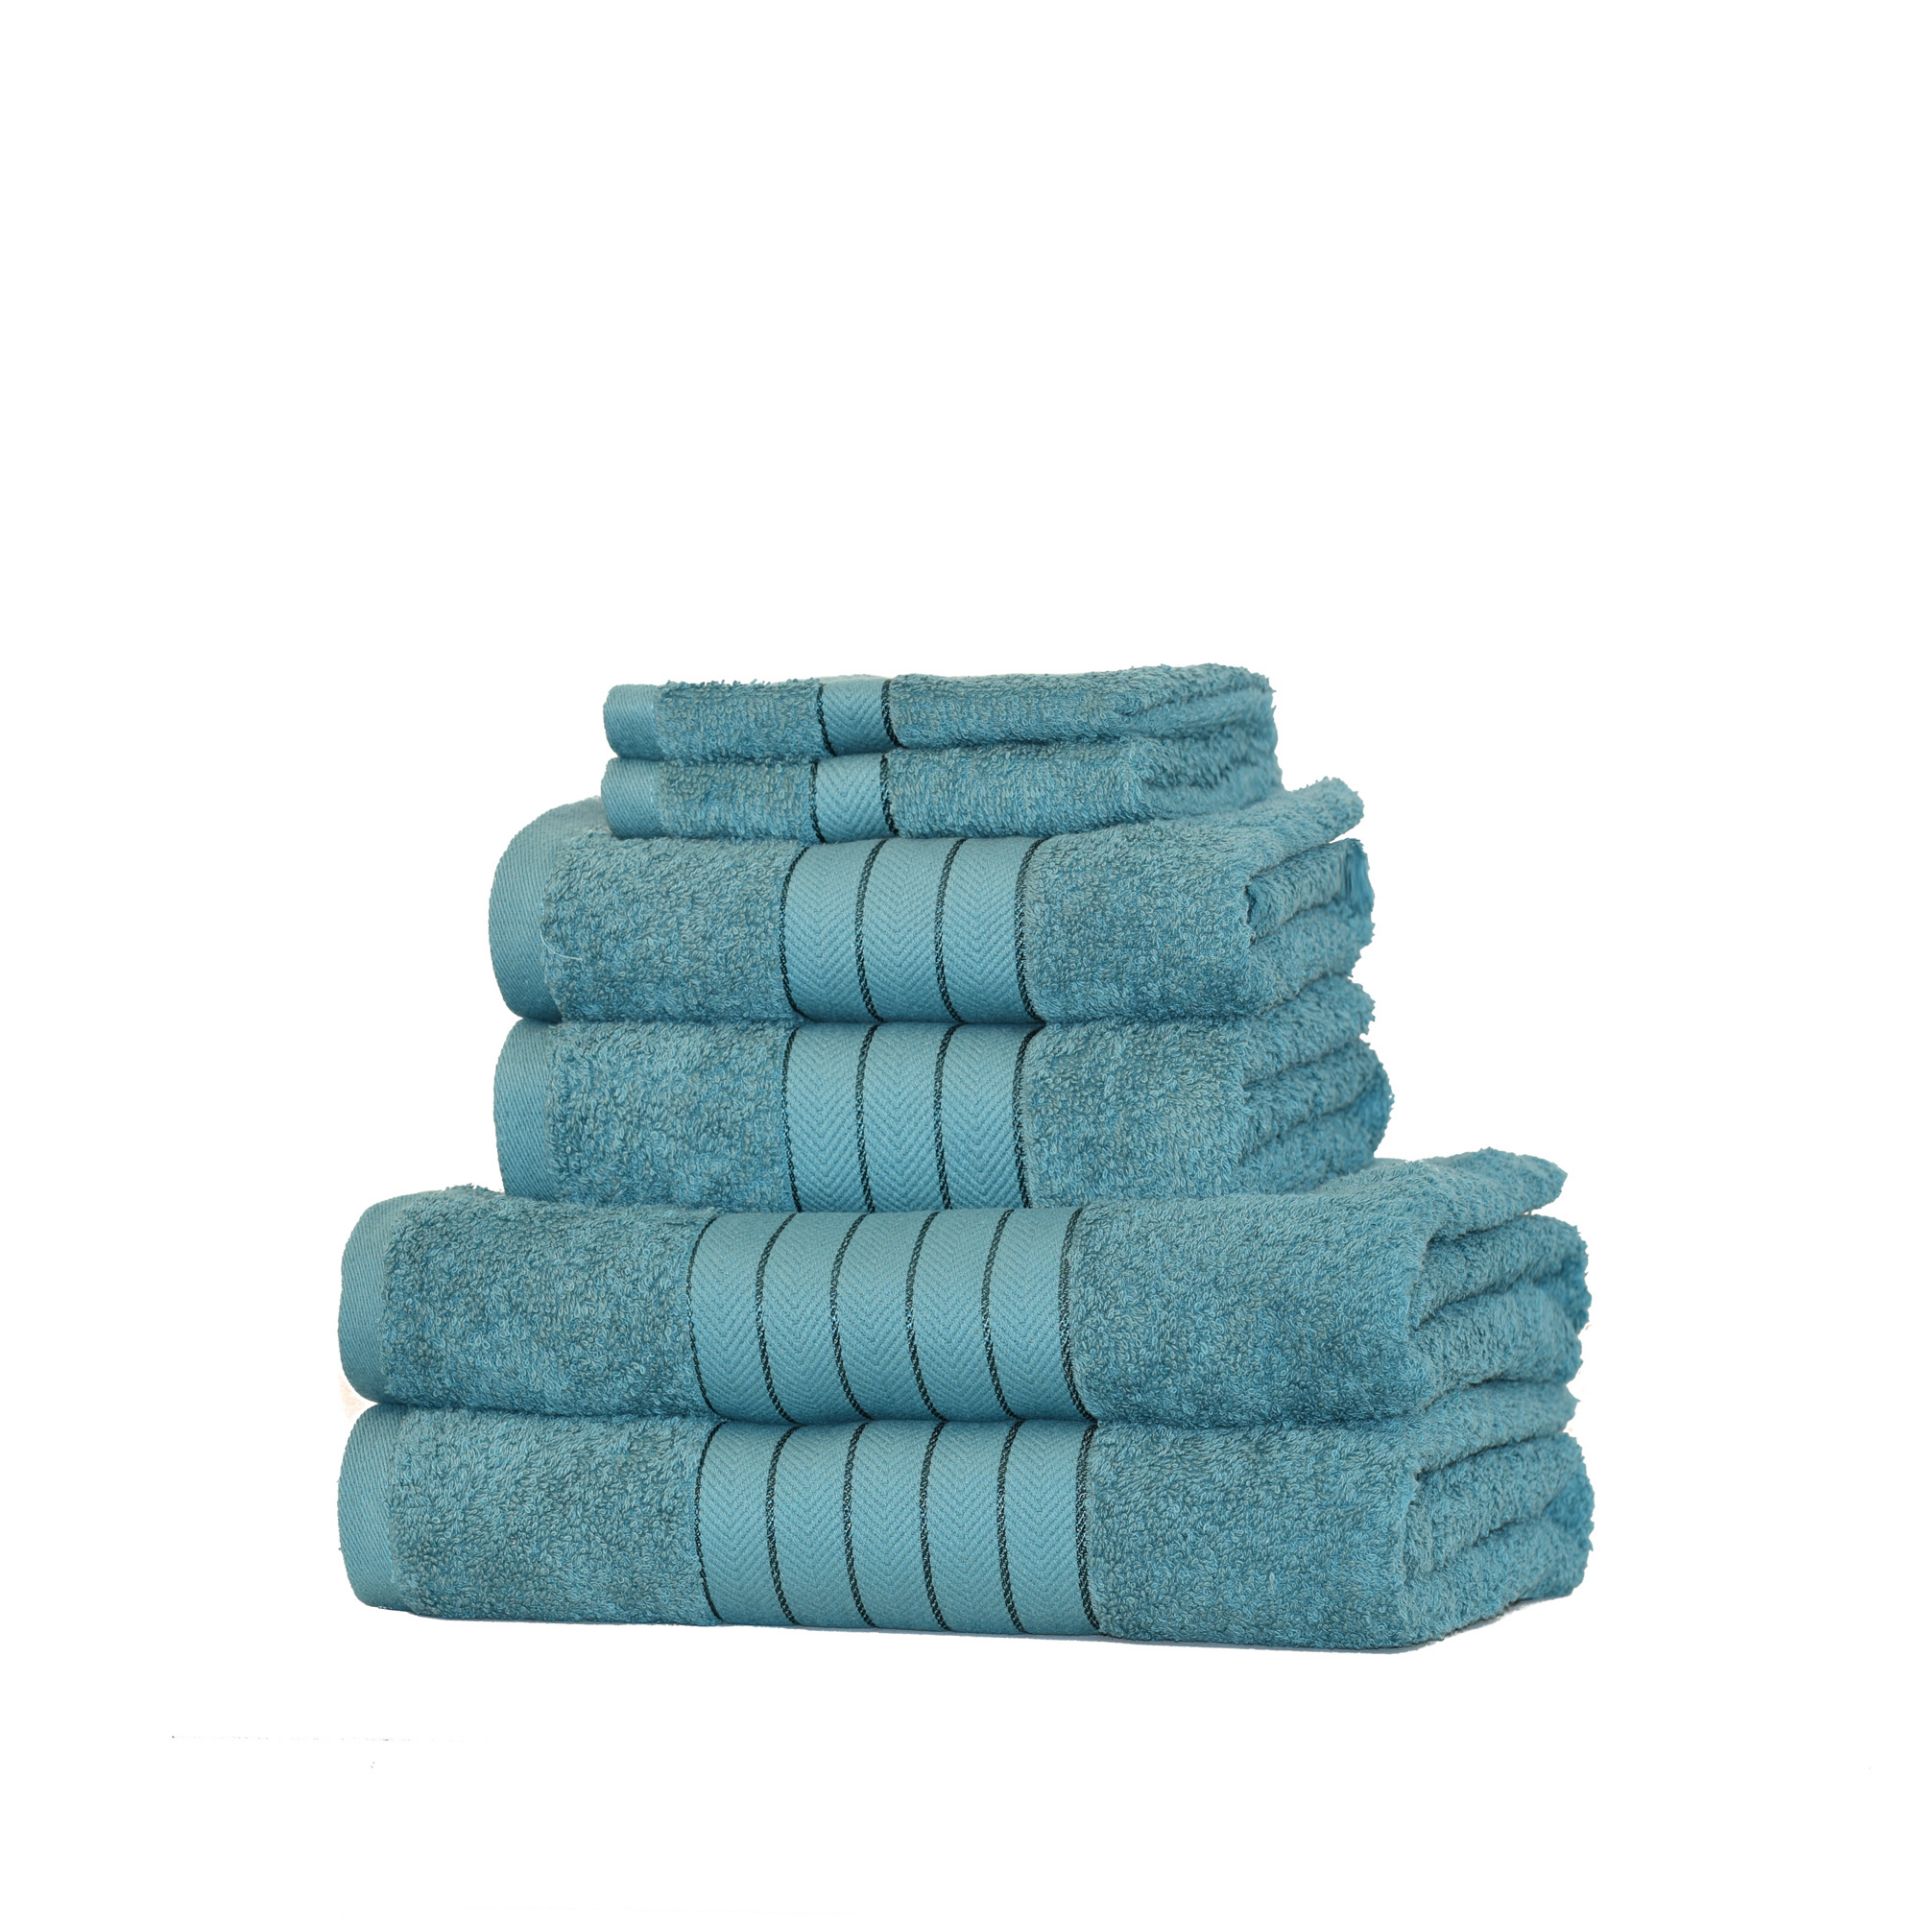 V *TRADE QTY* Brand New Turquoise 6 Piece Towel Bale Set With 2 Face Towels - 2 Hand Towels - 1 Bath